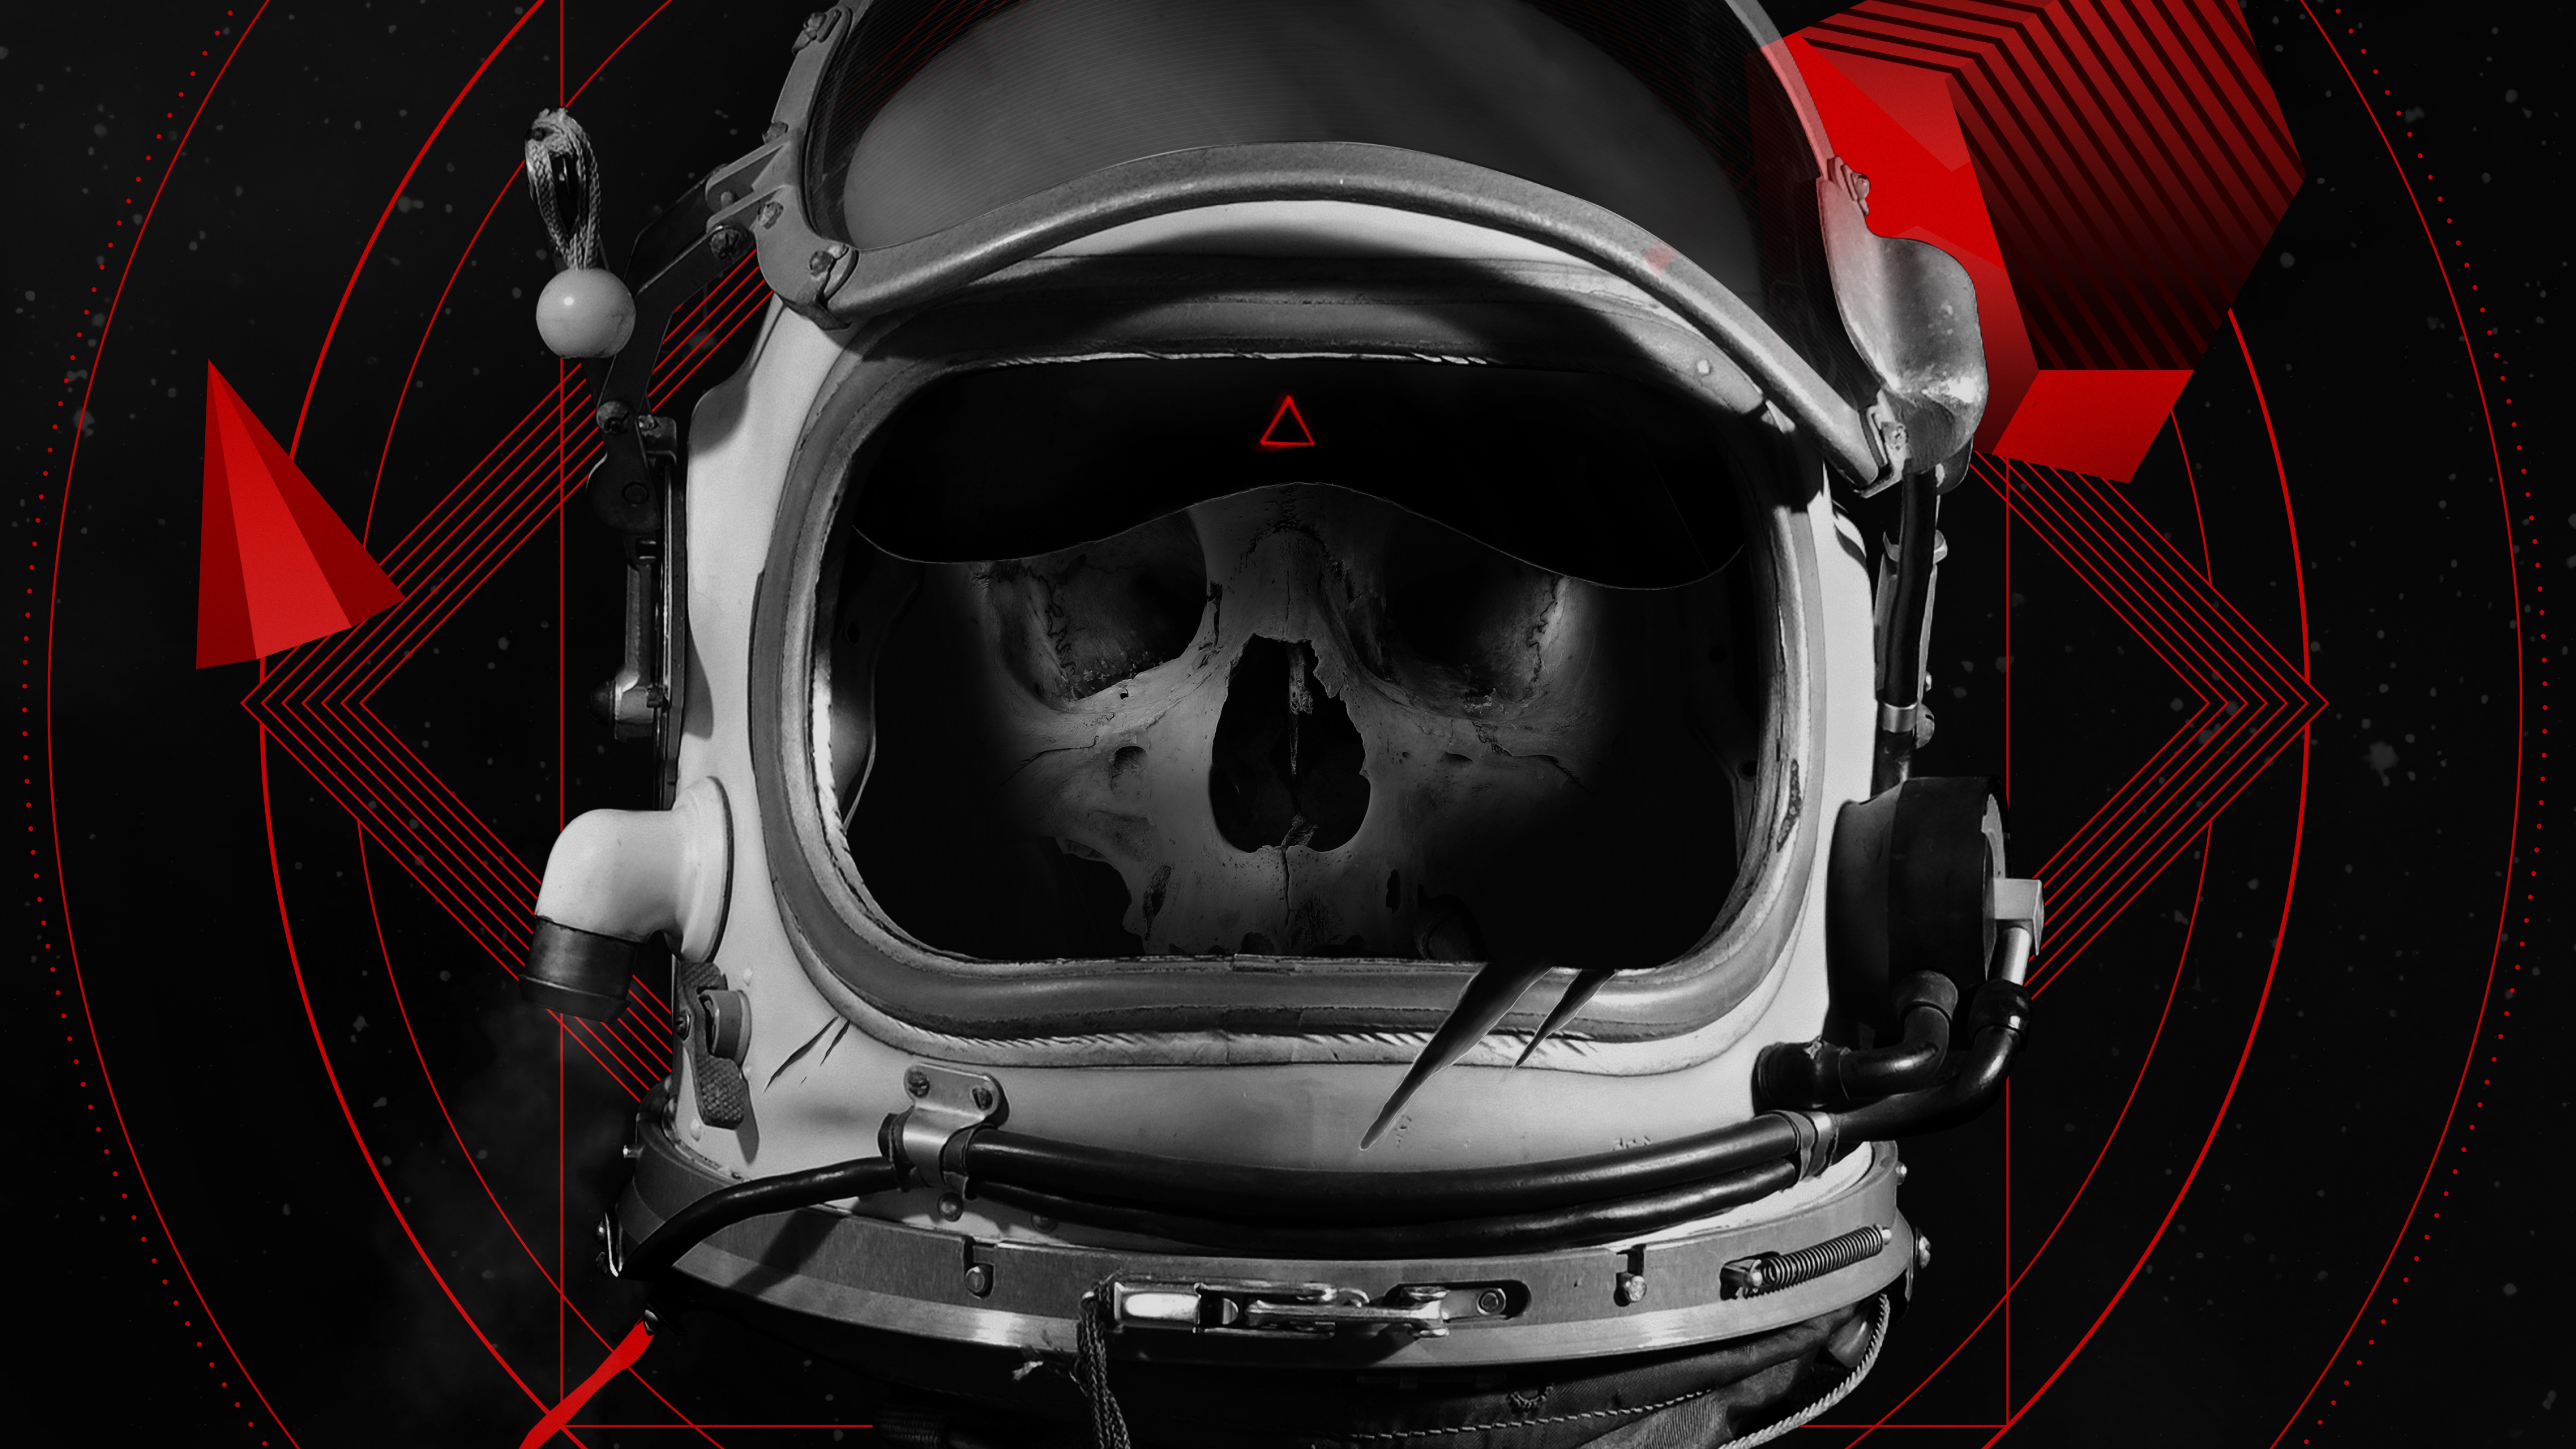 The human skull in the astronaut's helmet wallpaper and image